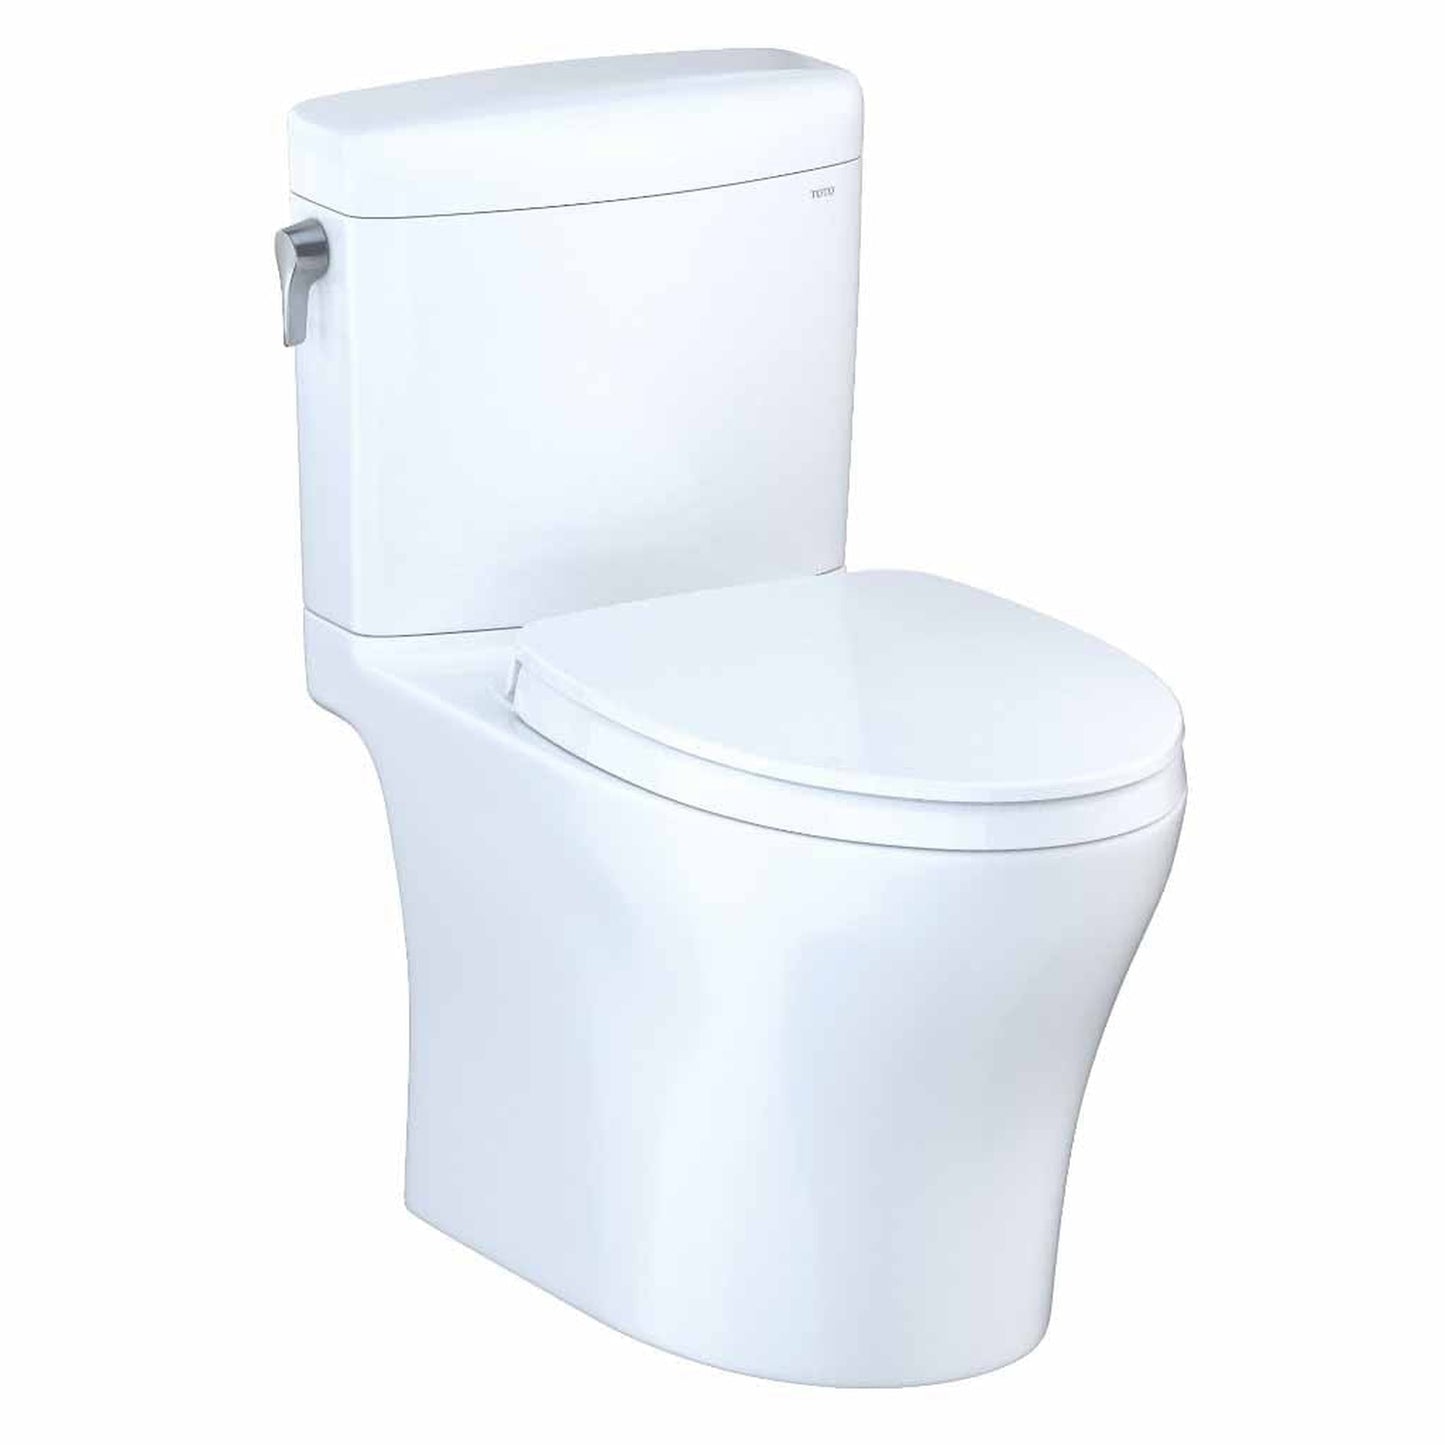 TOTO Aquia IV Cube Cotton White 1.28 GPF & 0.8 GPF Dual-Flush Two-Piece Elongated Toilet With WASHLET+ Connection - SoftClose Seat Included